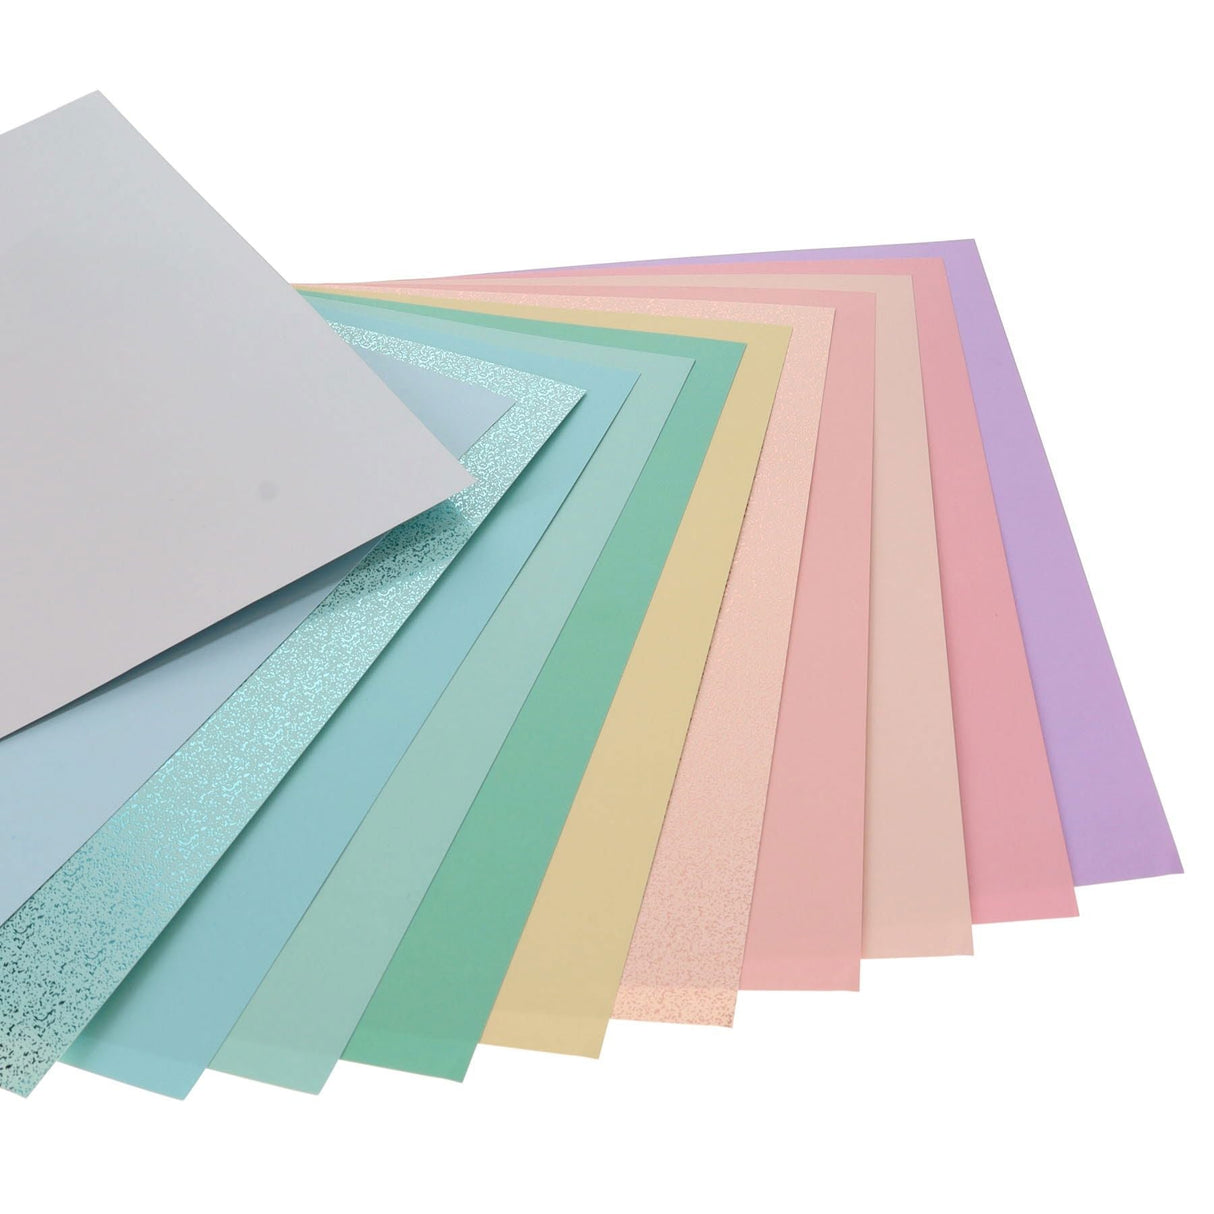 Premier Activity A4 Paper Pad - 22 Sheets - 180gsm - Shades of Pastels | Stationery Shop UK